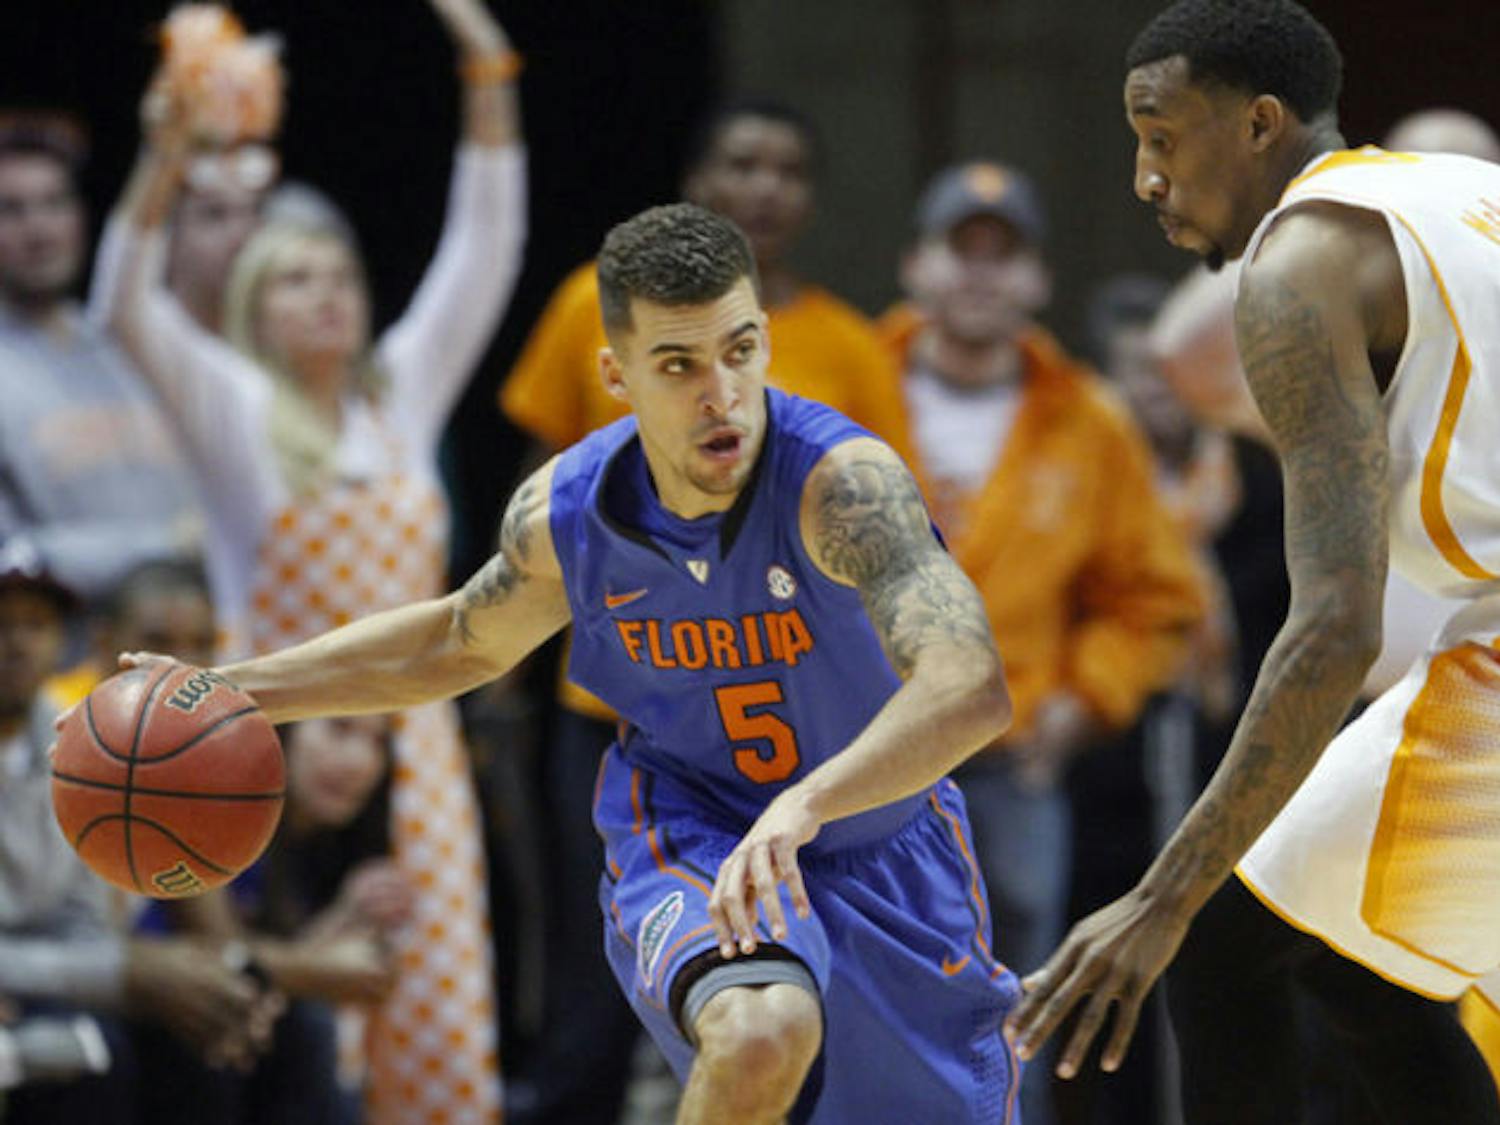 Scottie Wilbekin (5) drives against Tennessee guard Jordan McRae (52) in the first half of Florida’s 67-58 win on Feb. 11 in Knoxville, Tenn. Wilbekin was named the Southeastern Conference Player of the Week on Monday.